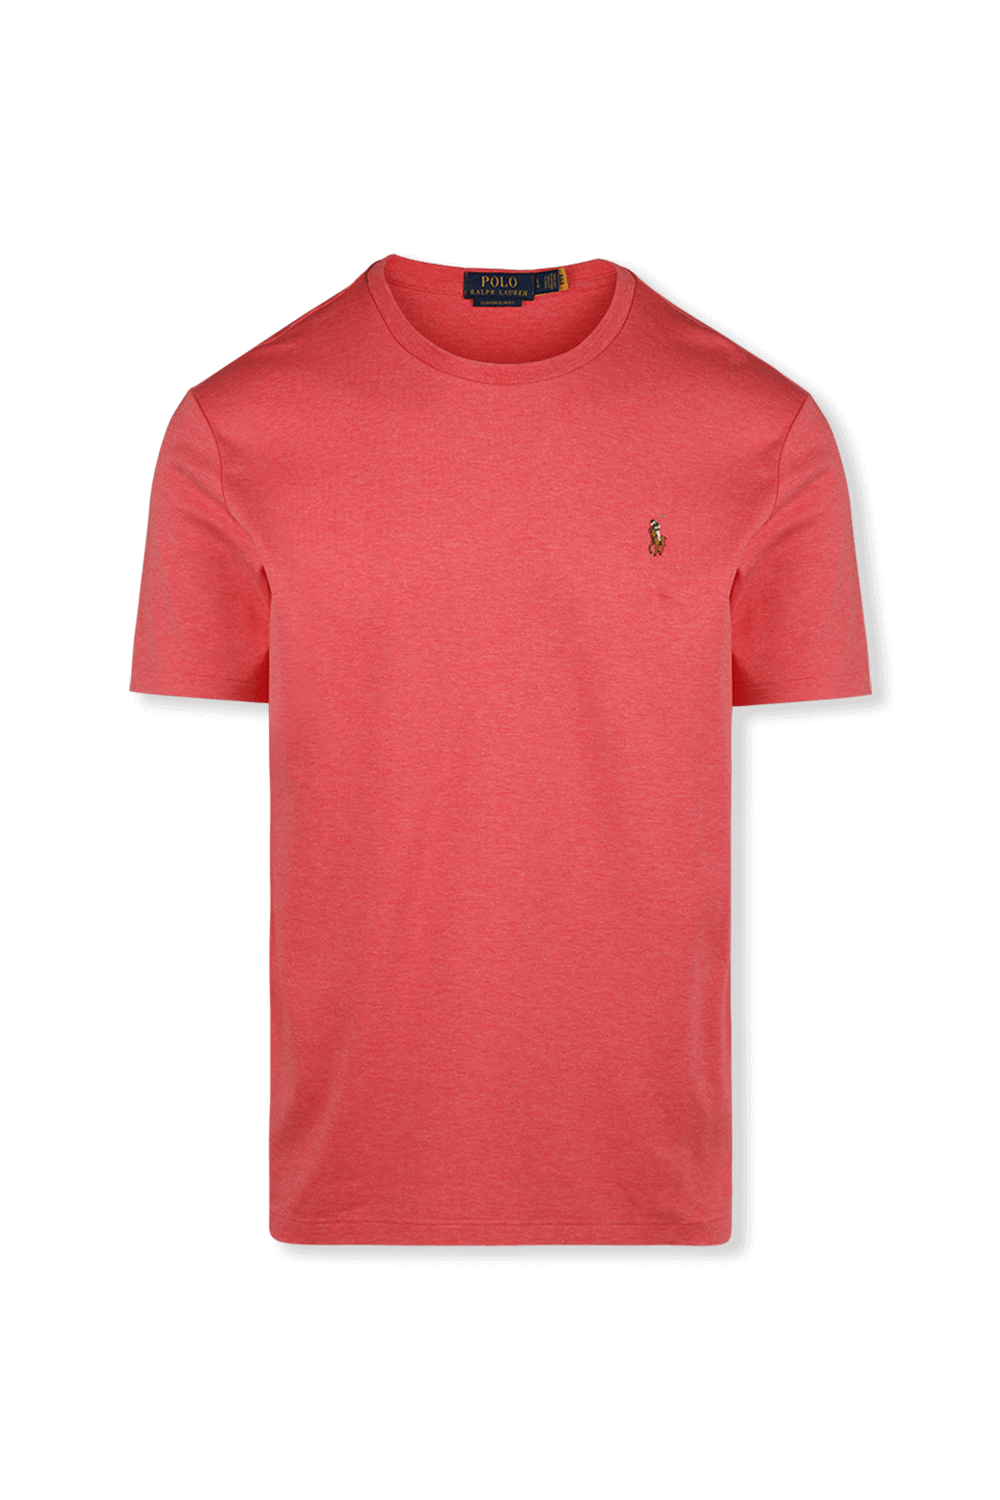 Slim Fit T-Shirt in Pink POLO RALPH LAUREN